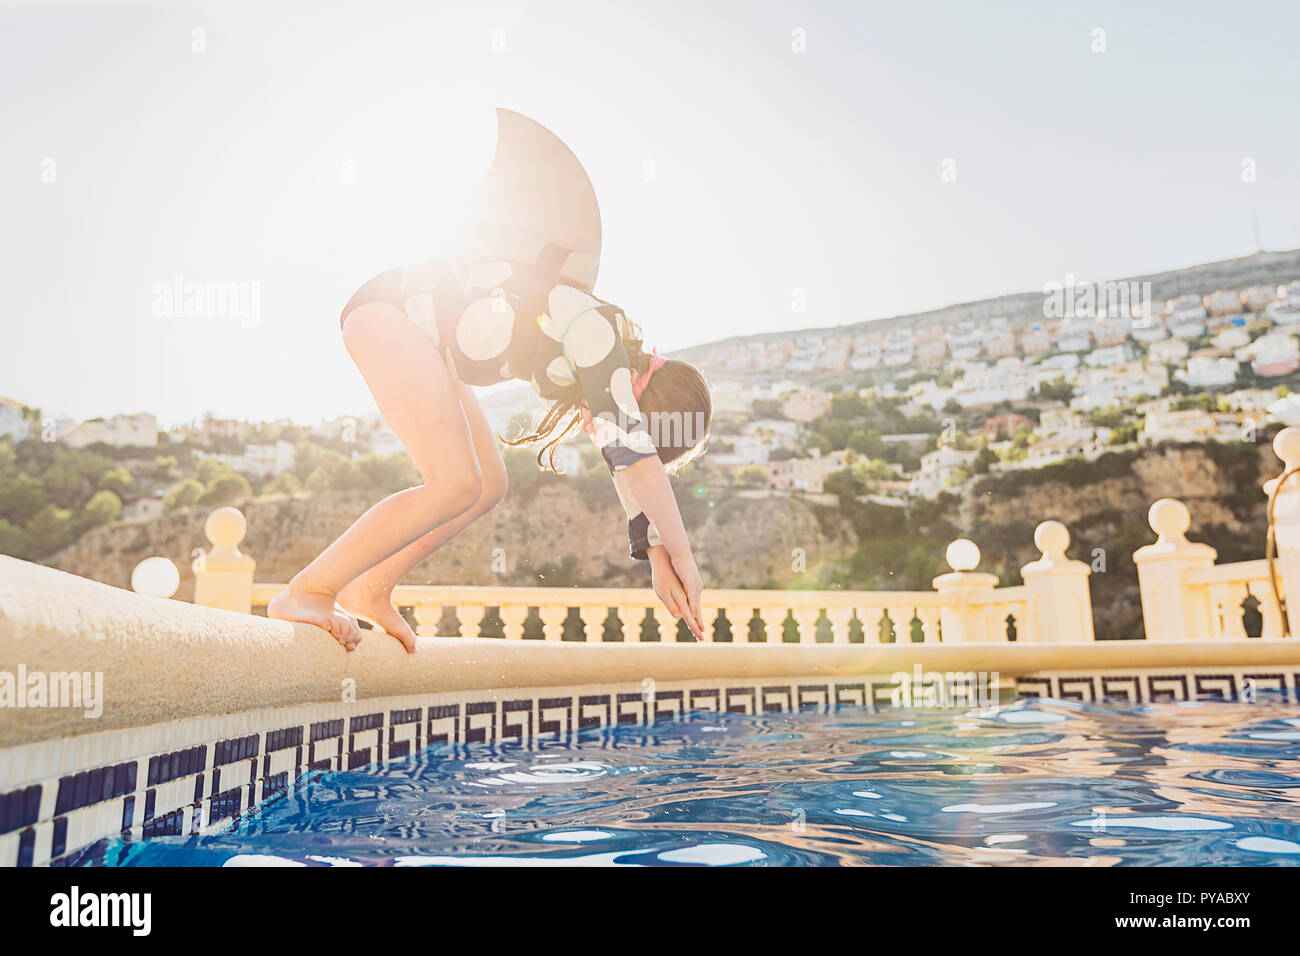 Young Girl diving into pool Stock Photo